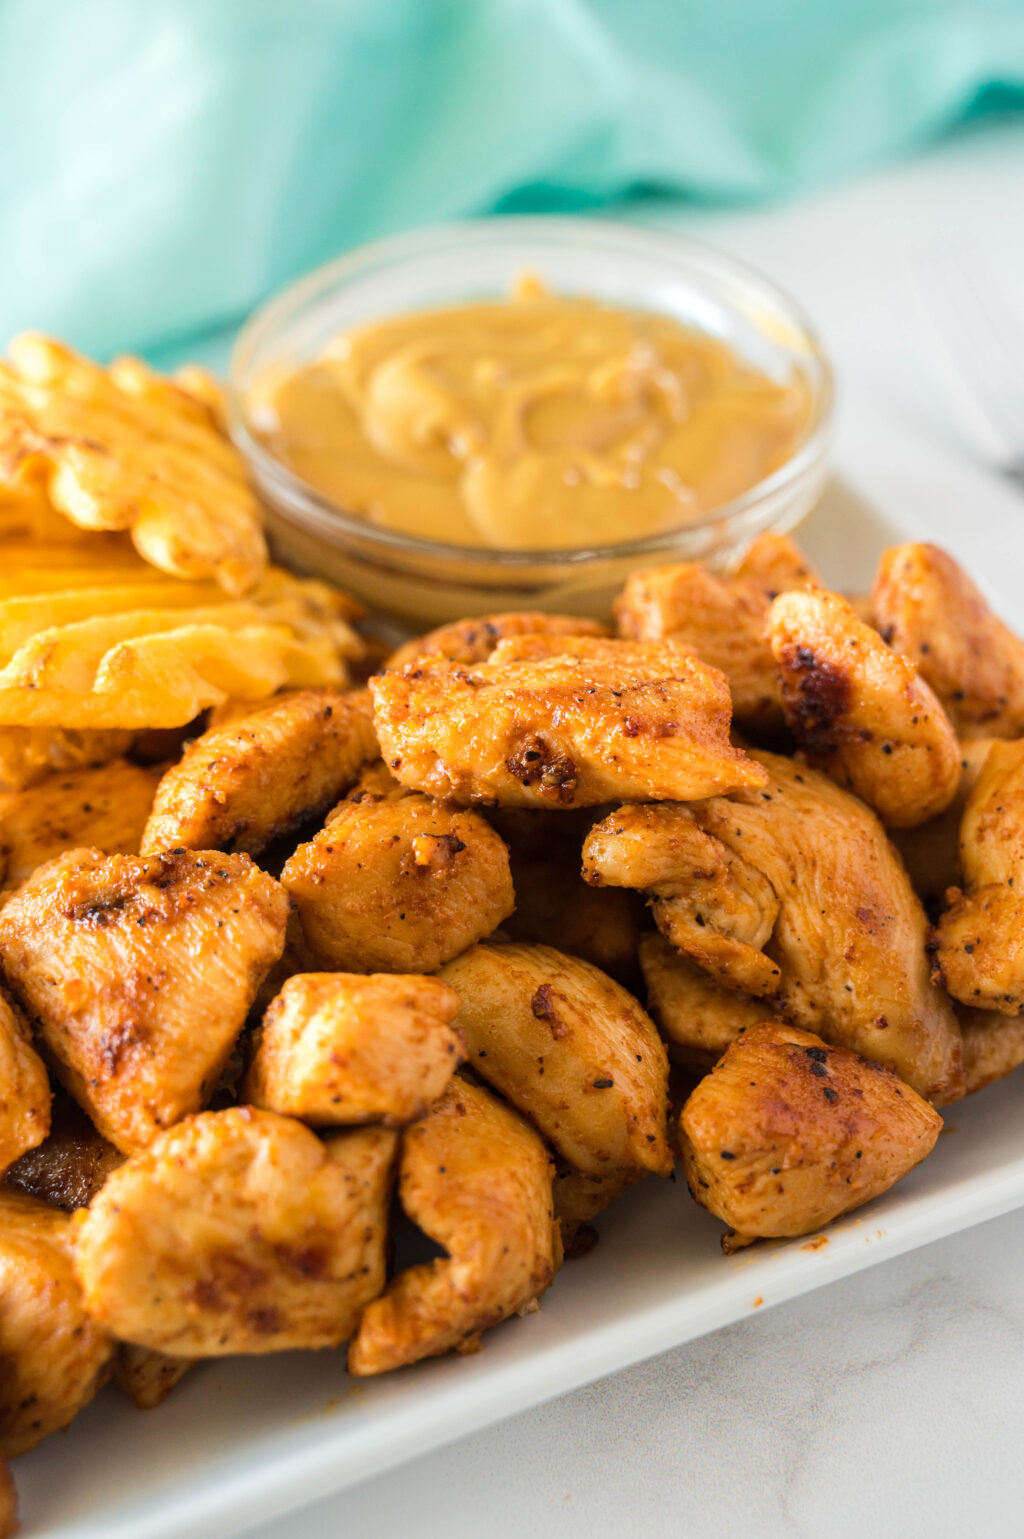 chick-fil-a grilled nuggets on a plate with chickfila sauce